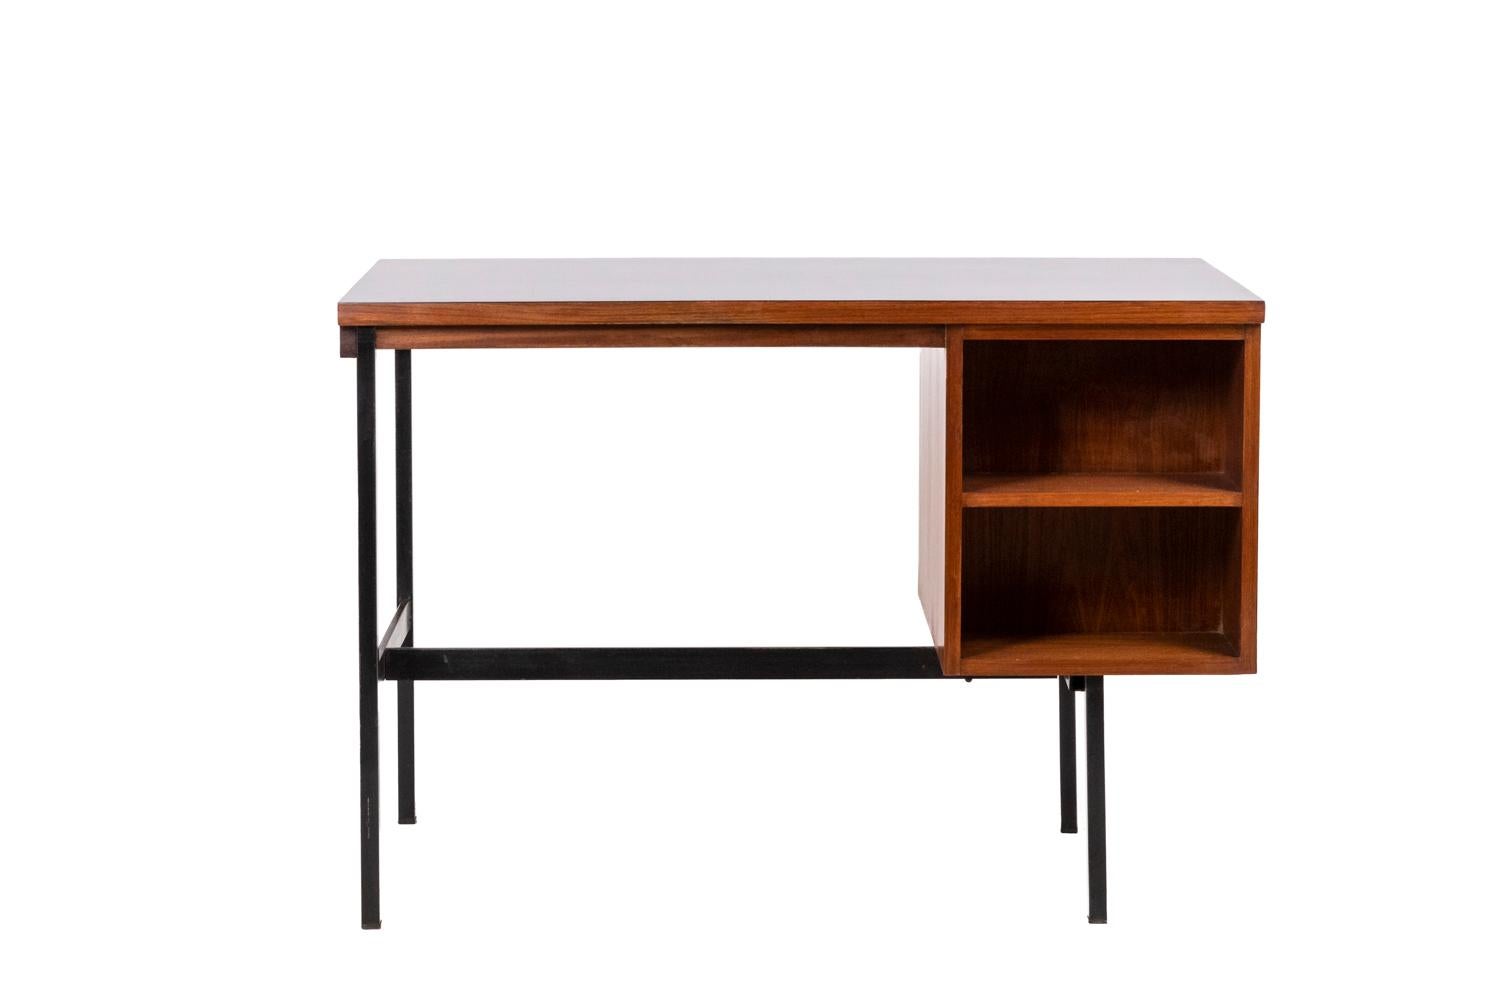 Mid-20th Century Jacques Hitier for Multiplex, Desk “Multitaple” in Mahogany, 1950s For Sale